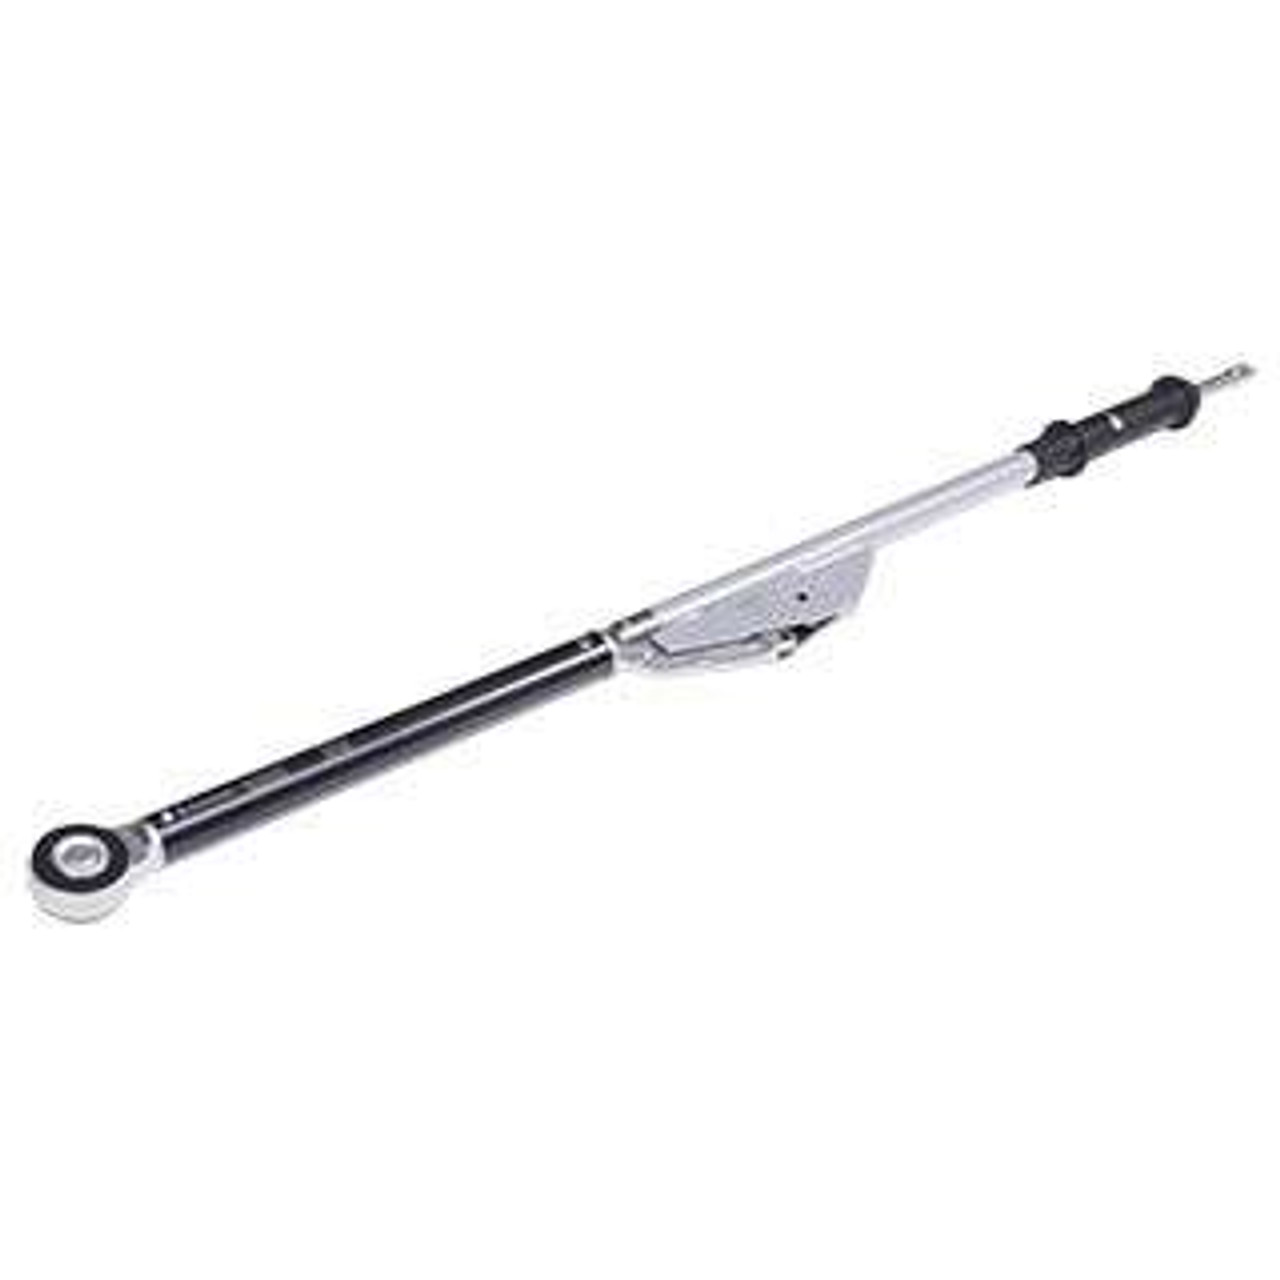 3/4" Dr 150 - 600 ft lbs / 200 - 800 Nm Norbar Break-Back Industrial Adj Torque Wrench - 120110 120110 4AR-N physical Norbar New Pro Torque Tools